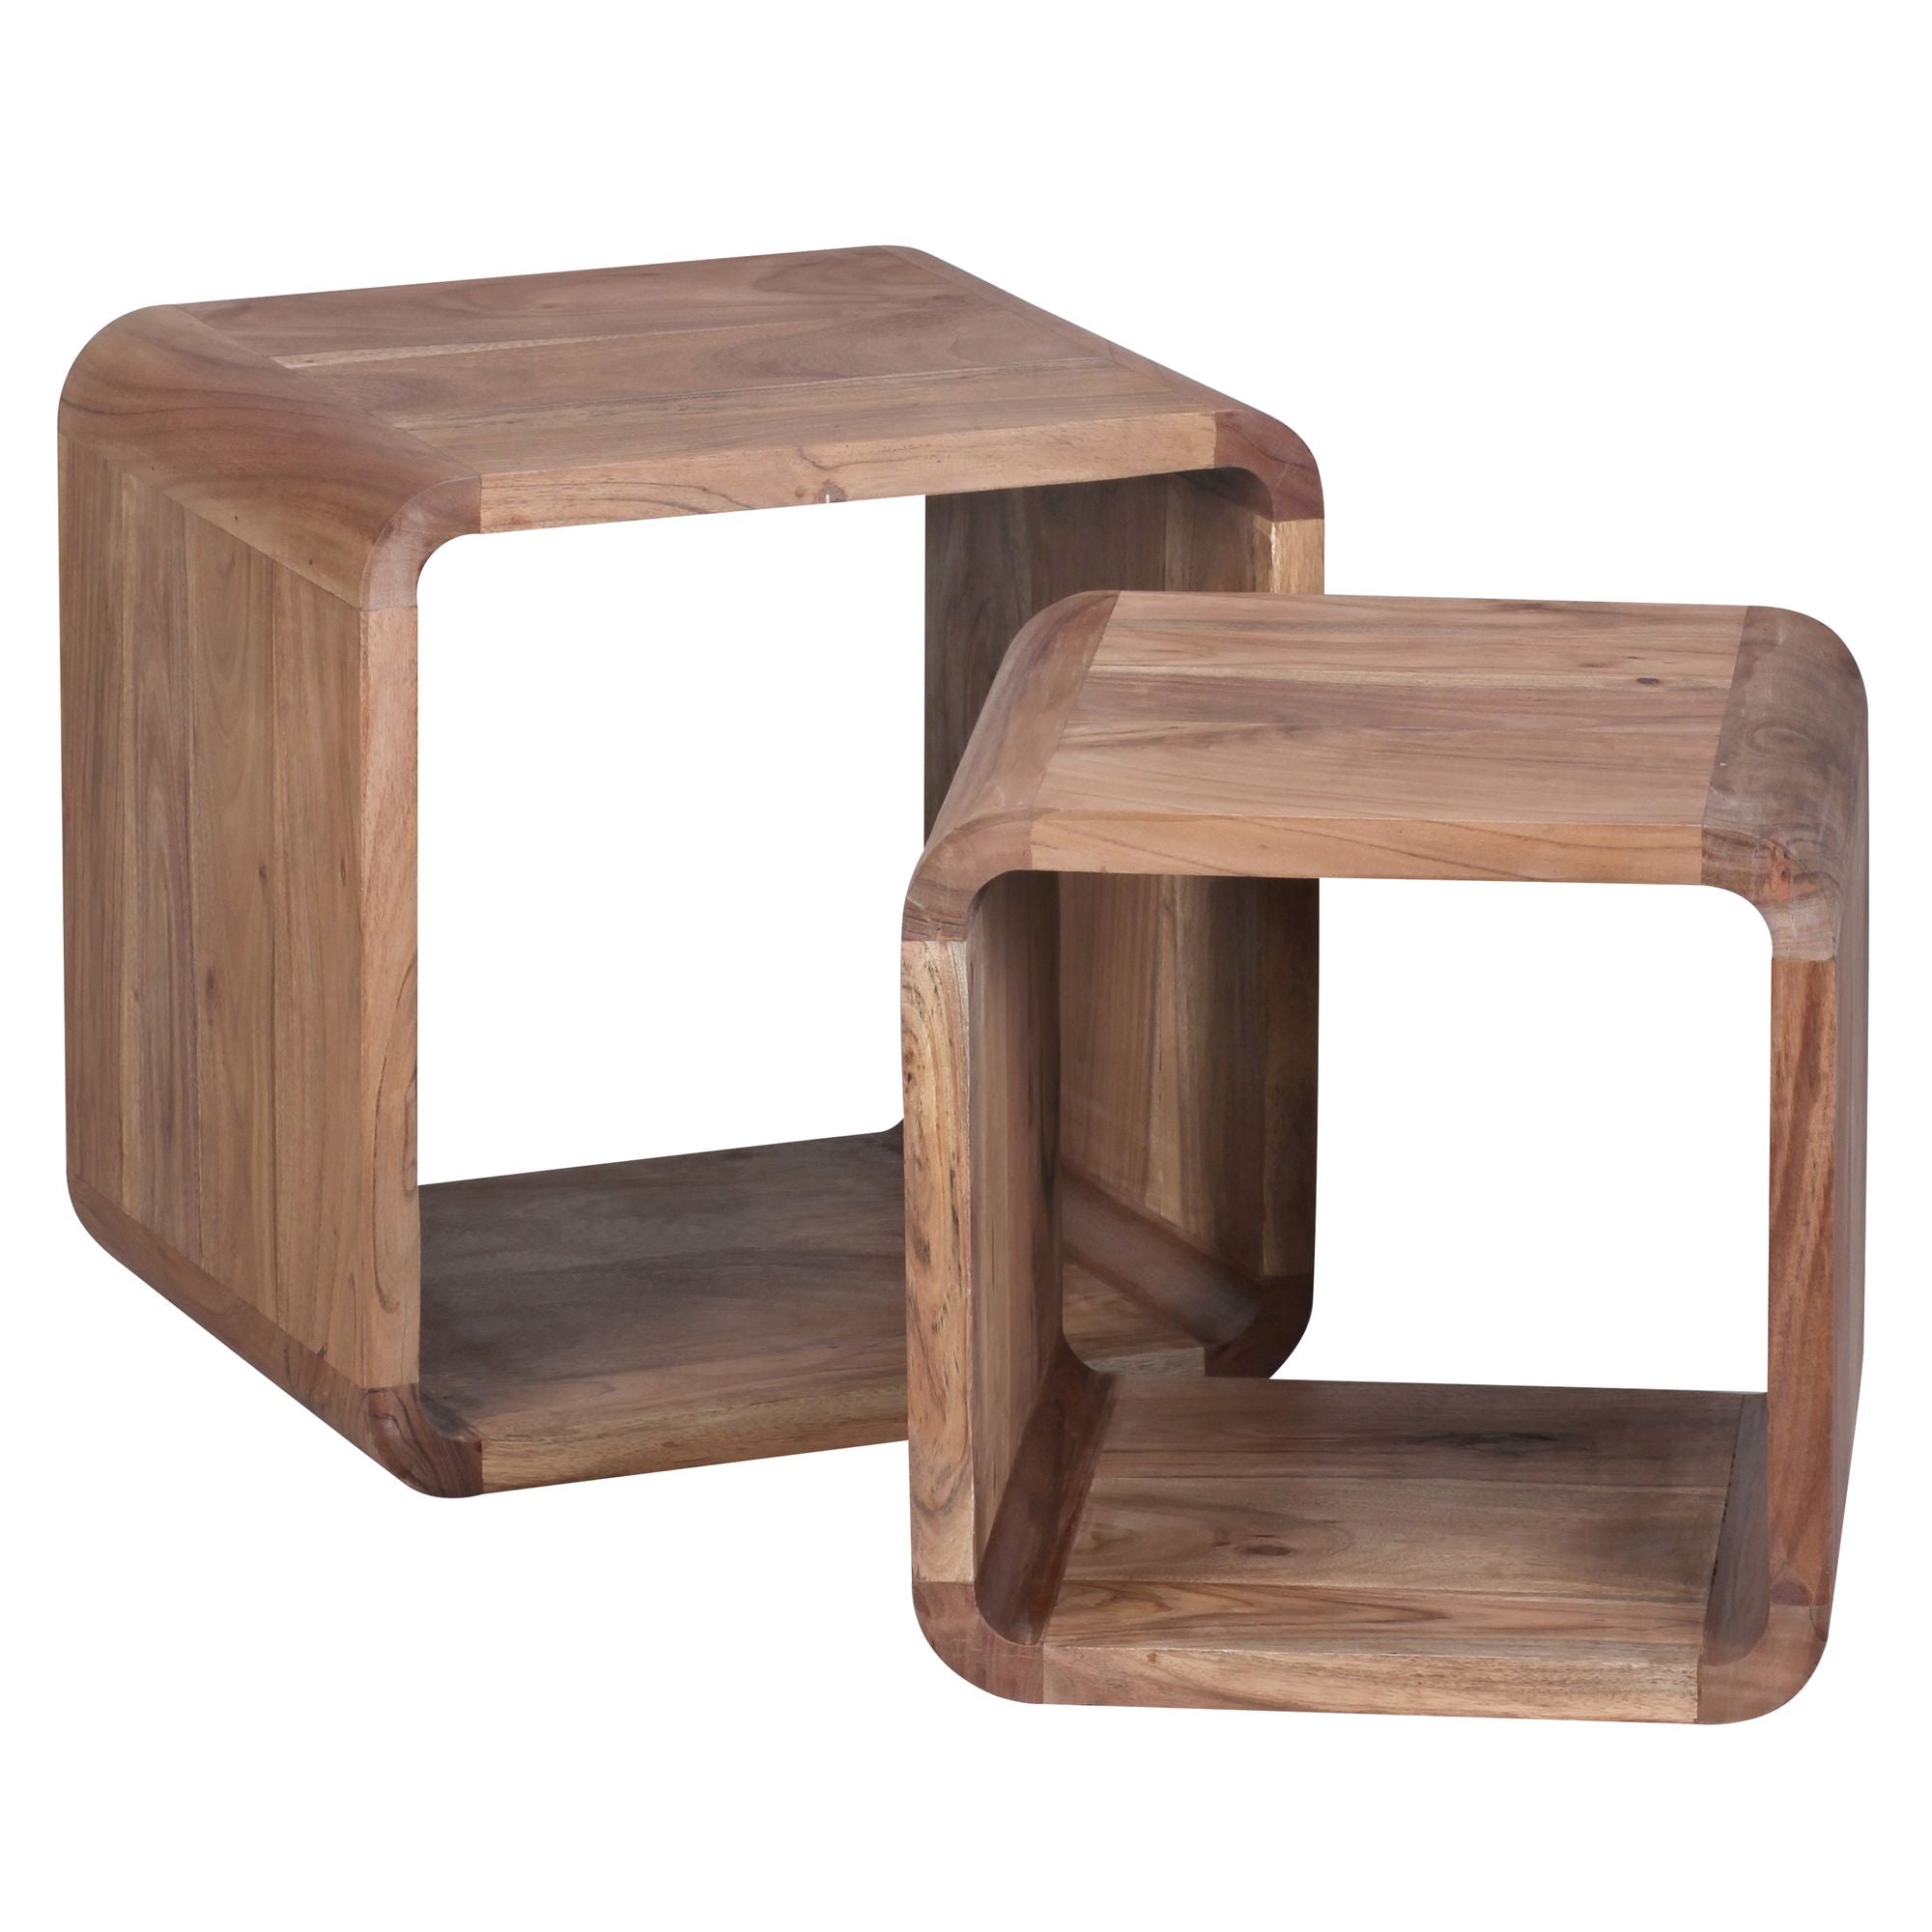 Nancy's Wixom Side Tables - Set of 2 - Bedside Tables - Cube - Open Storage Space - Solid Wood - Acacia - Brown